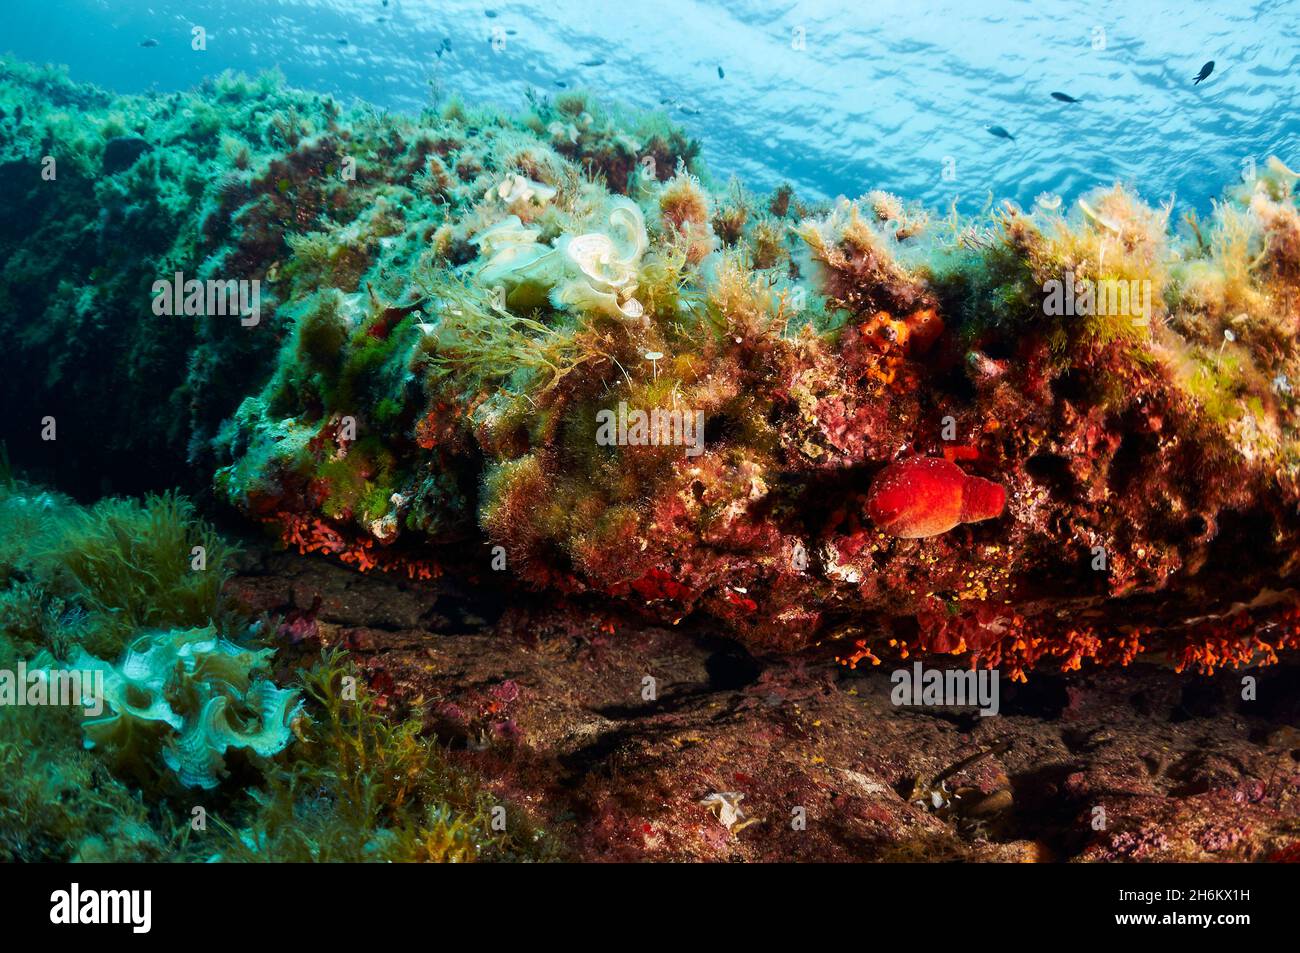 Underwater view of red sea-squirt (Halocynthia papillosa) and encrusting marine life in Ses Salines Natural Park (Formentera, Mediterranean sea,Spain) Stock Photo